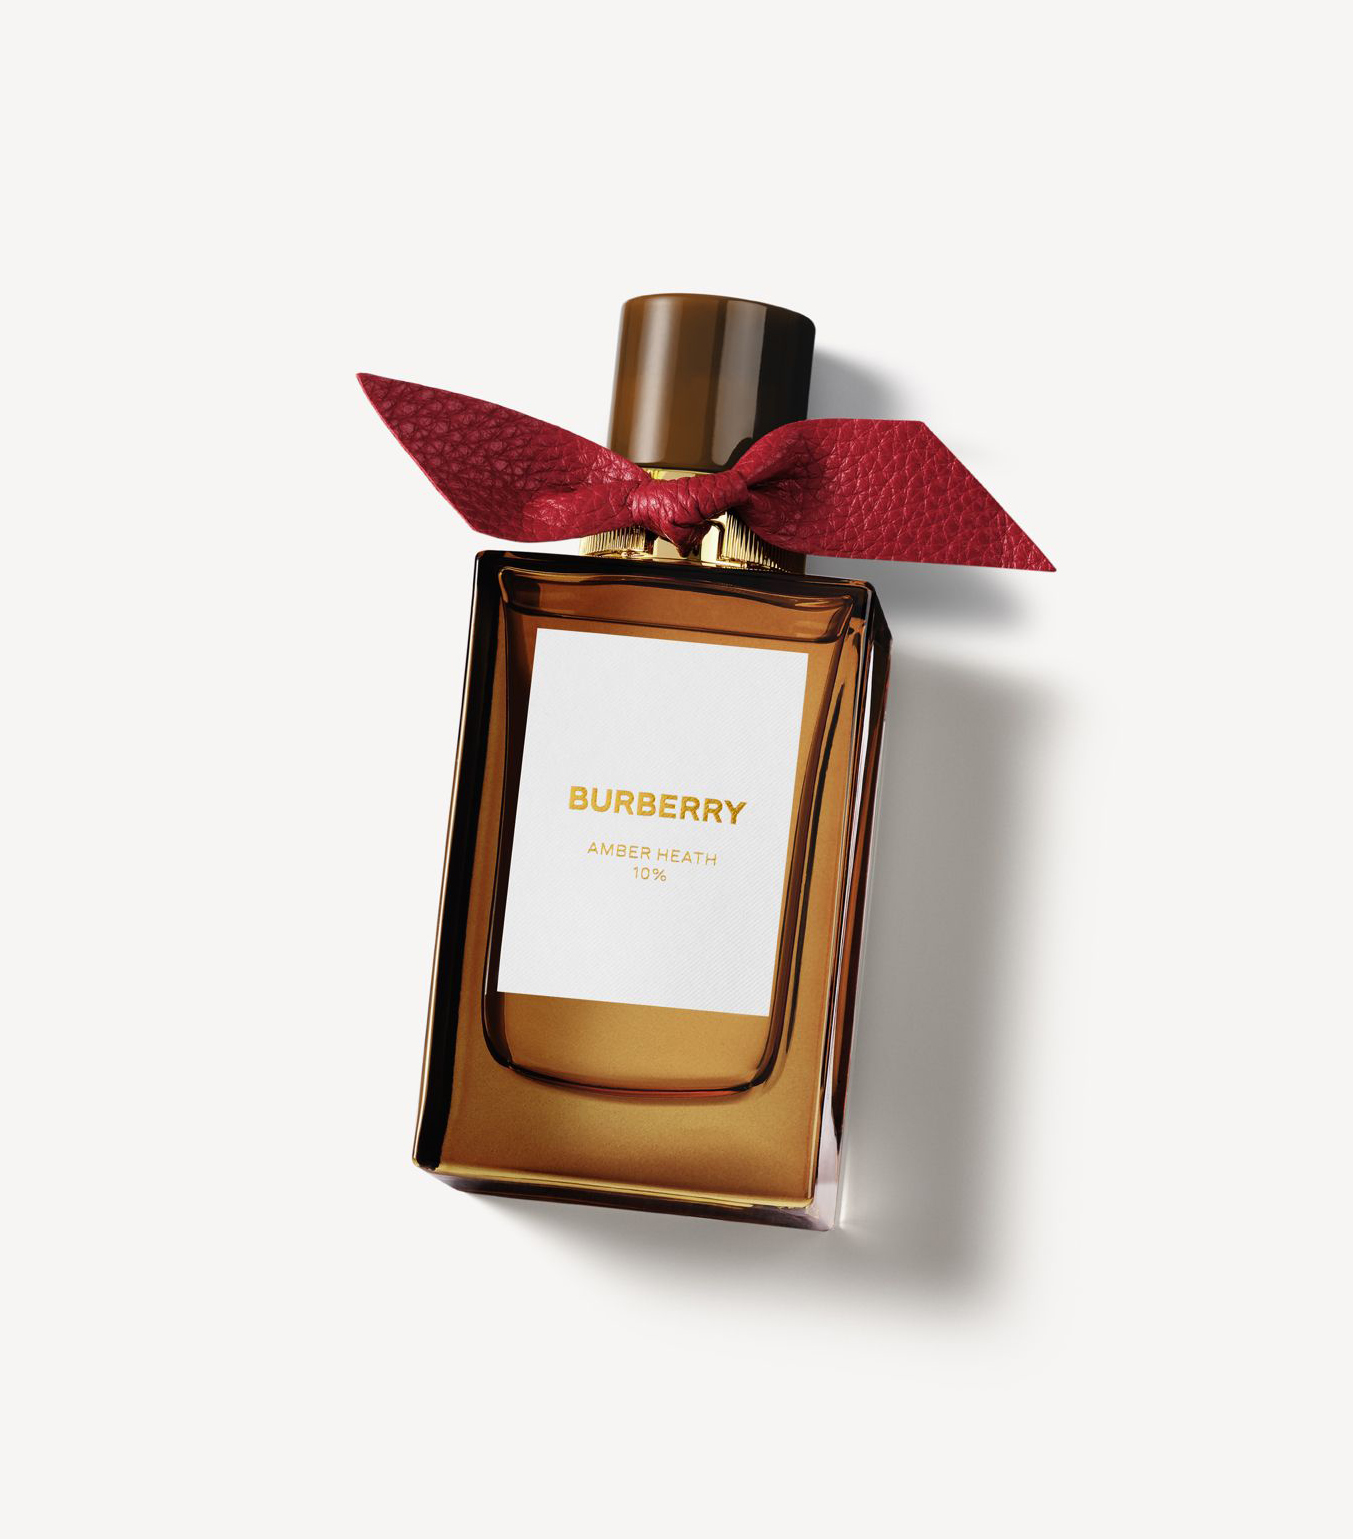 The 9 Best Burberry Perfumes, According to Reviews | Who What Wear